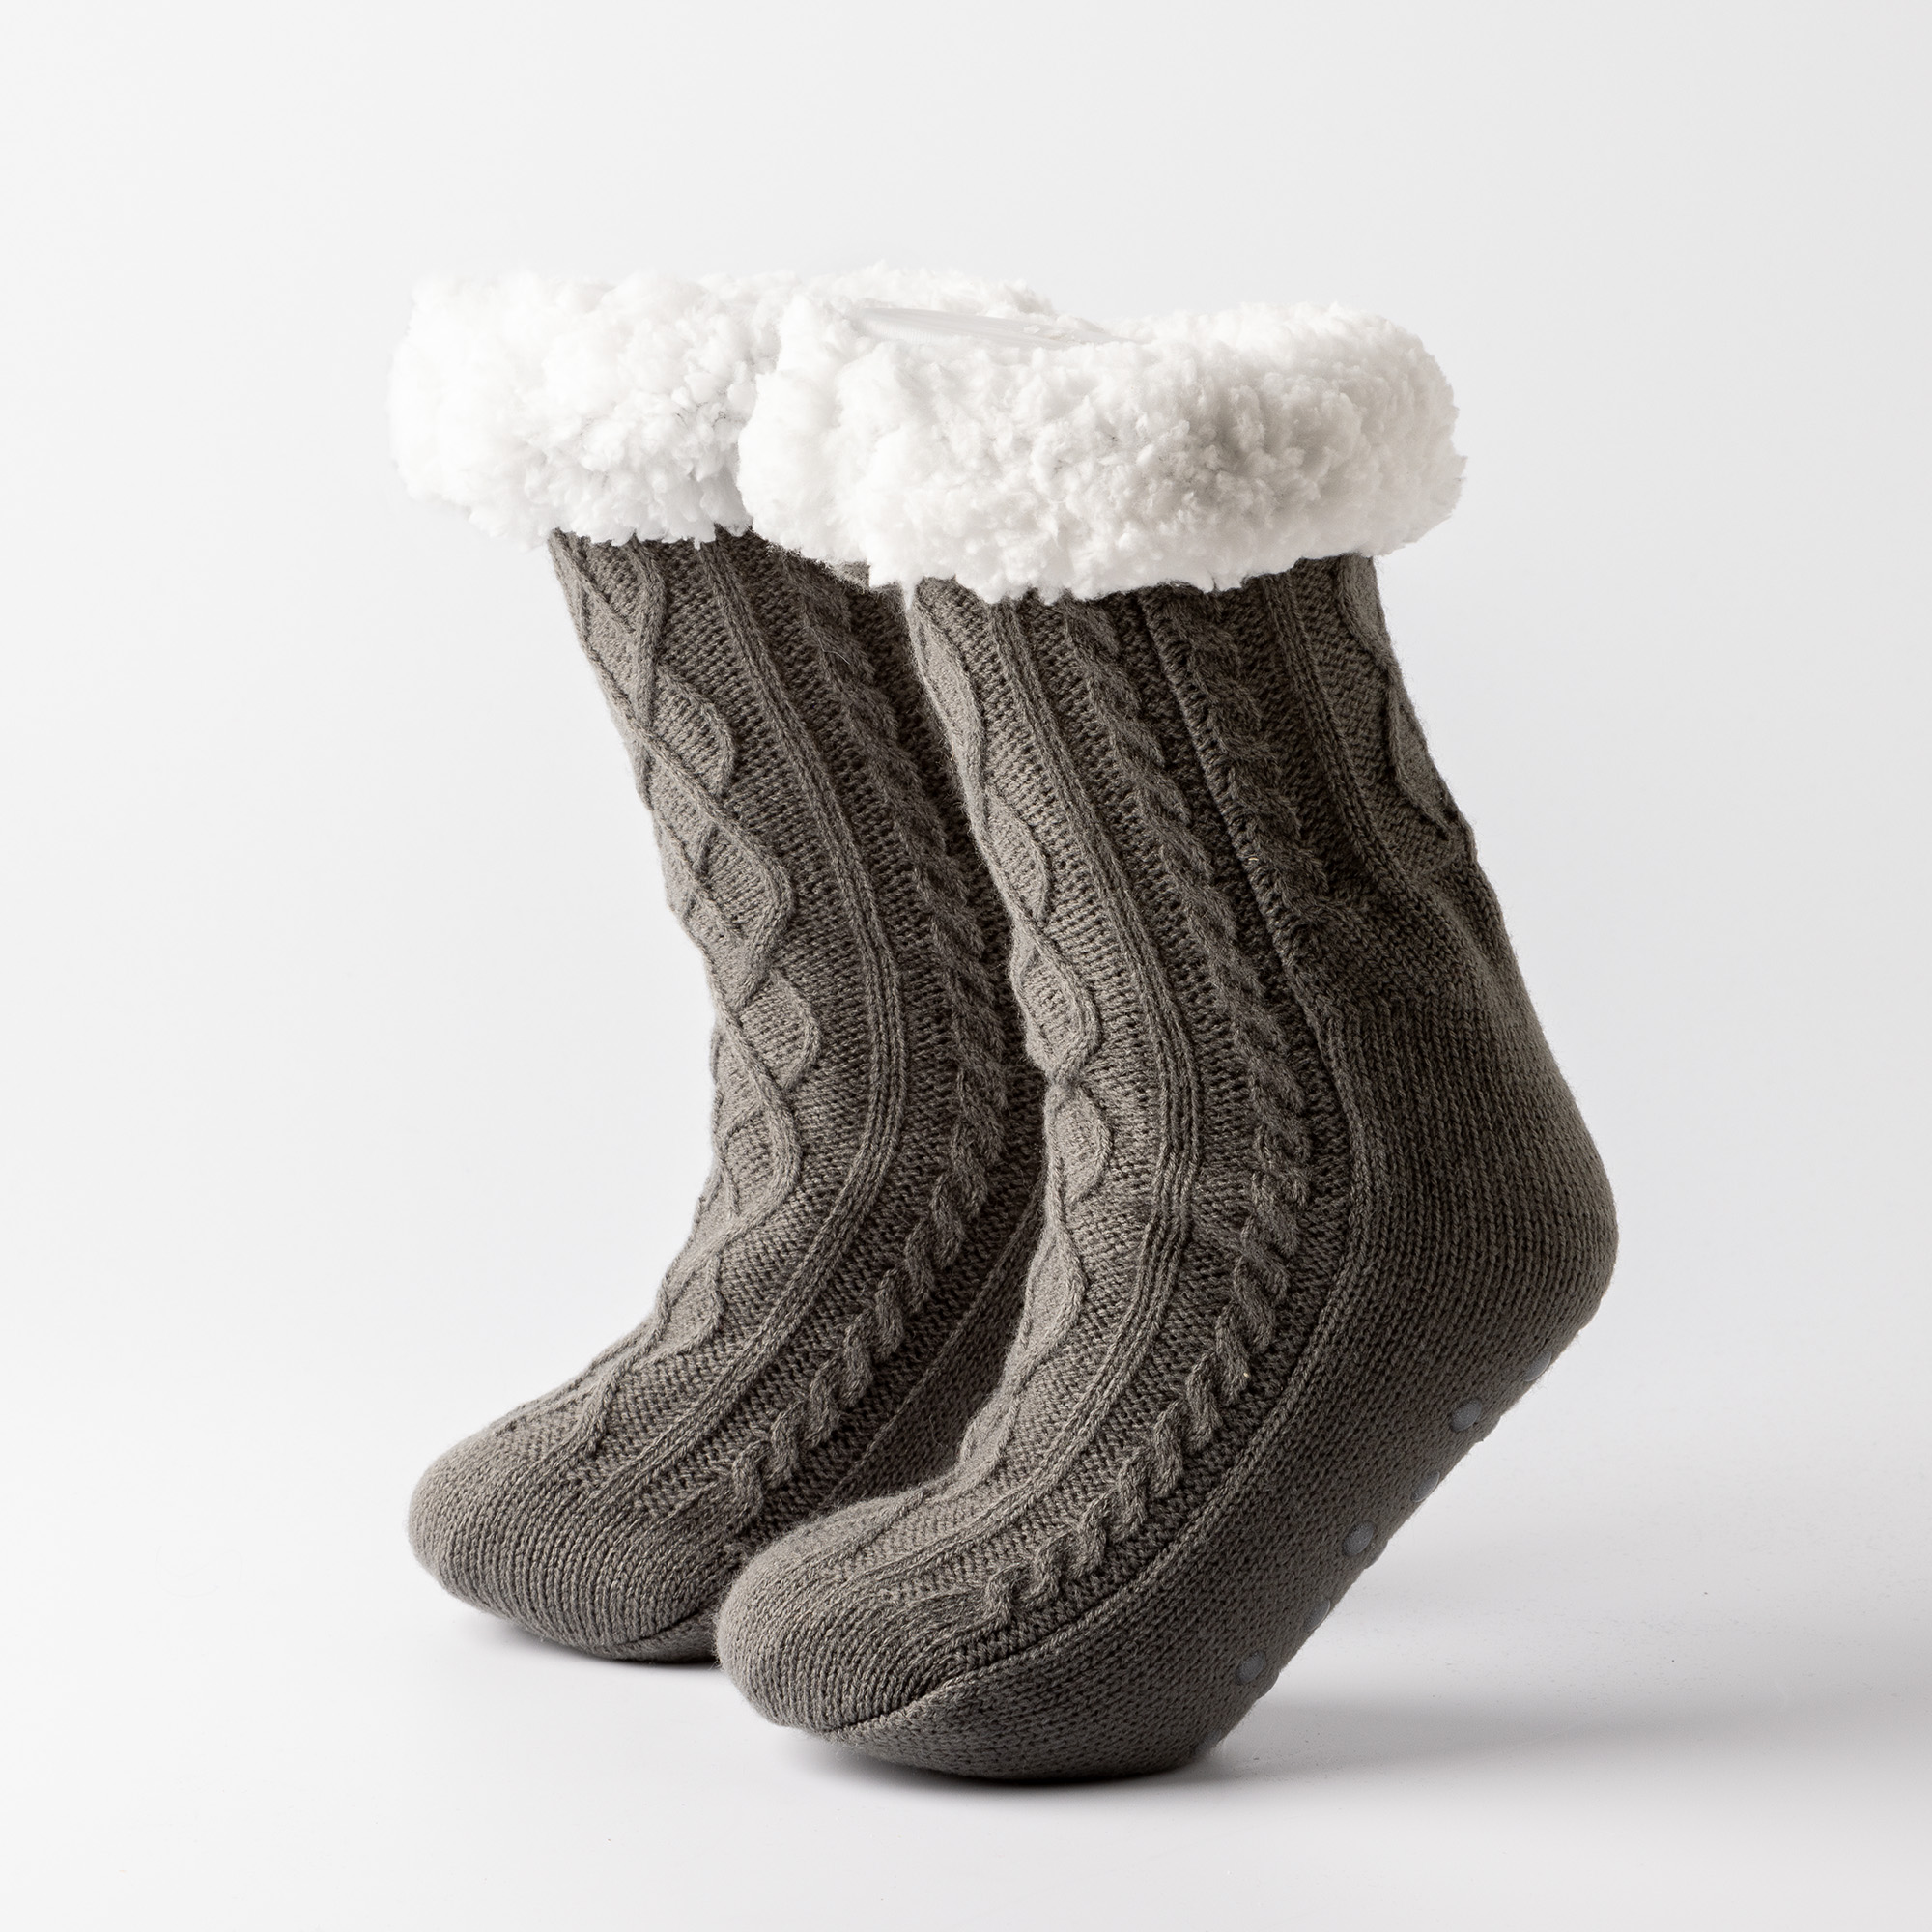 ELZA - House socks - non-slip - with sherpa lining - one size  - Charcoal Gray - antracite